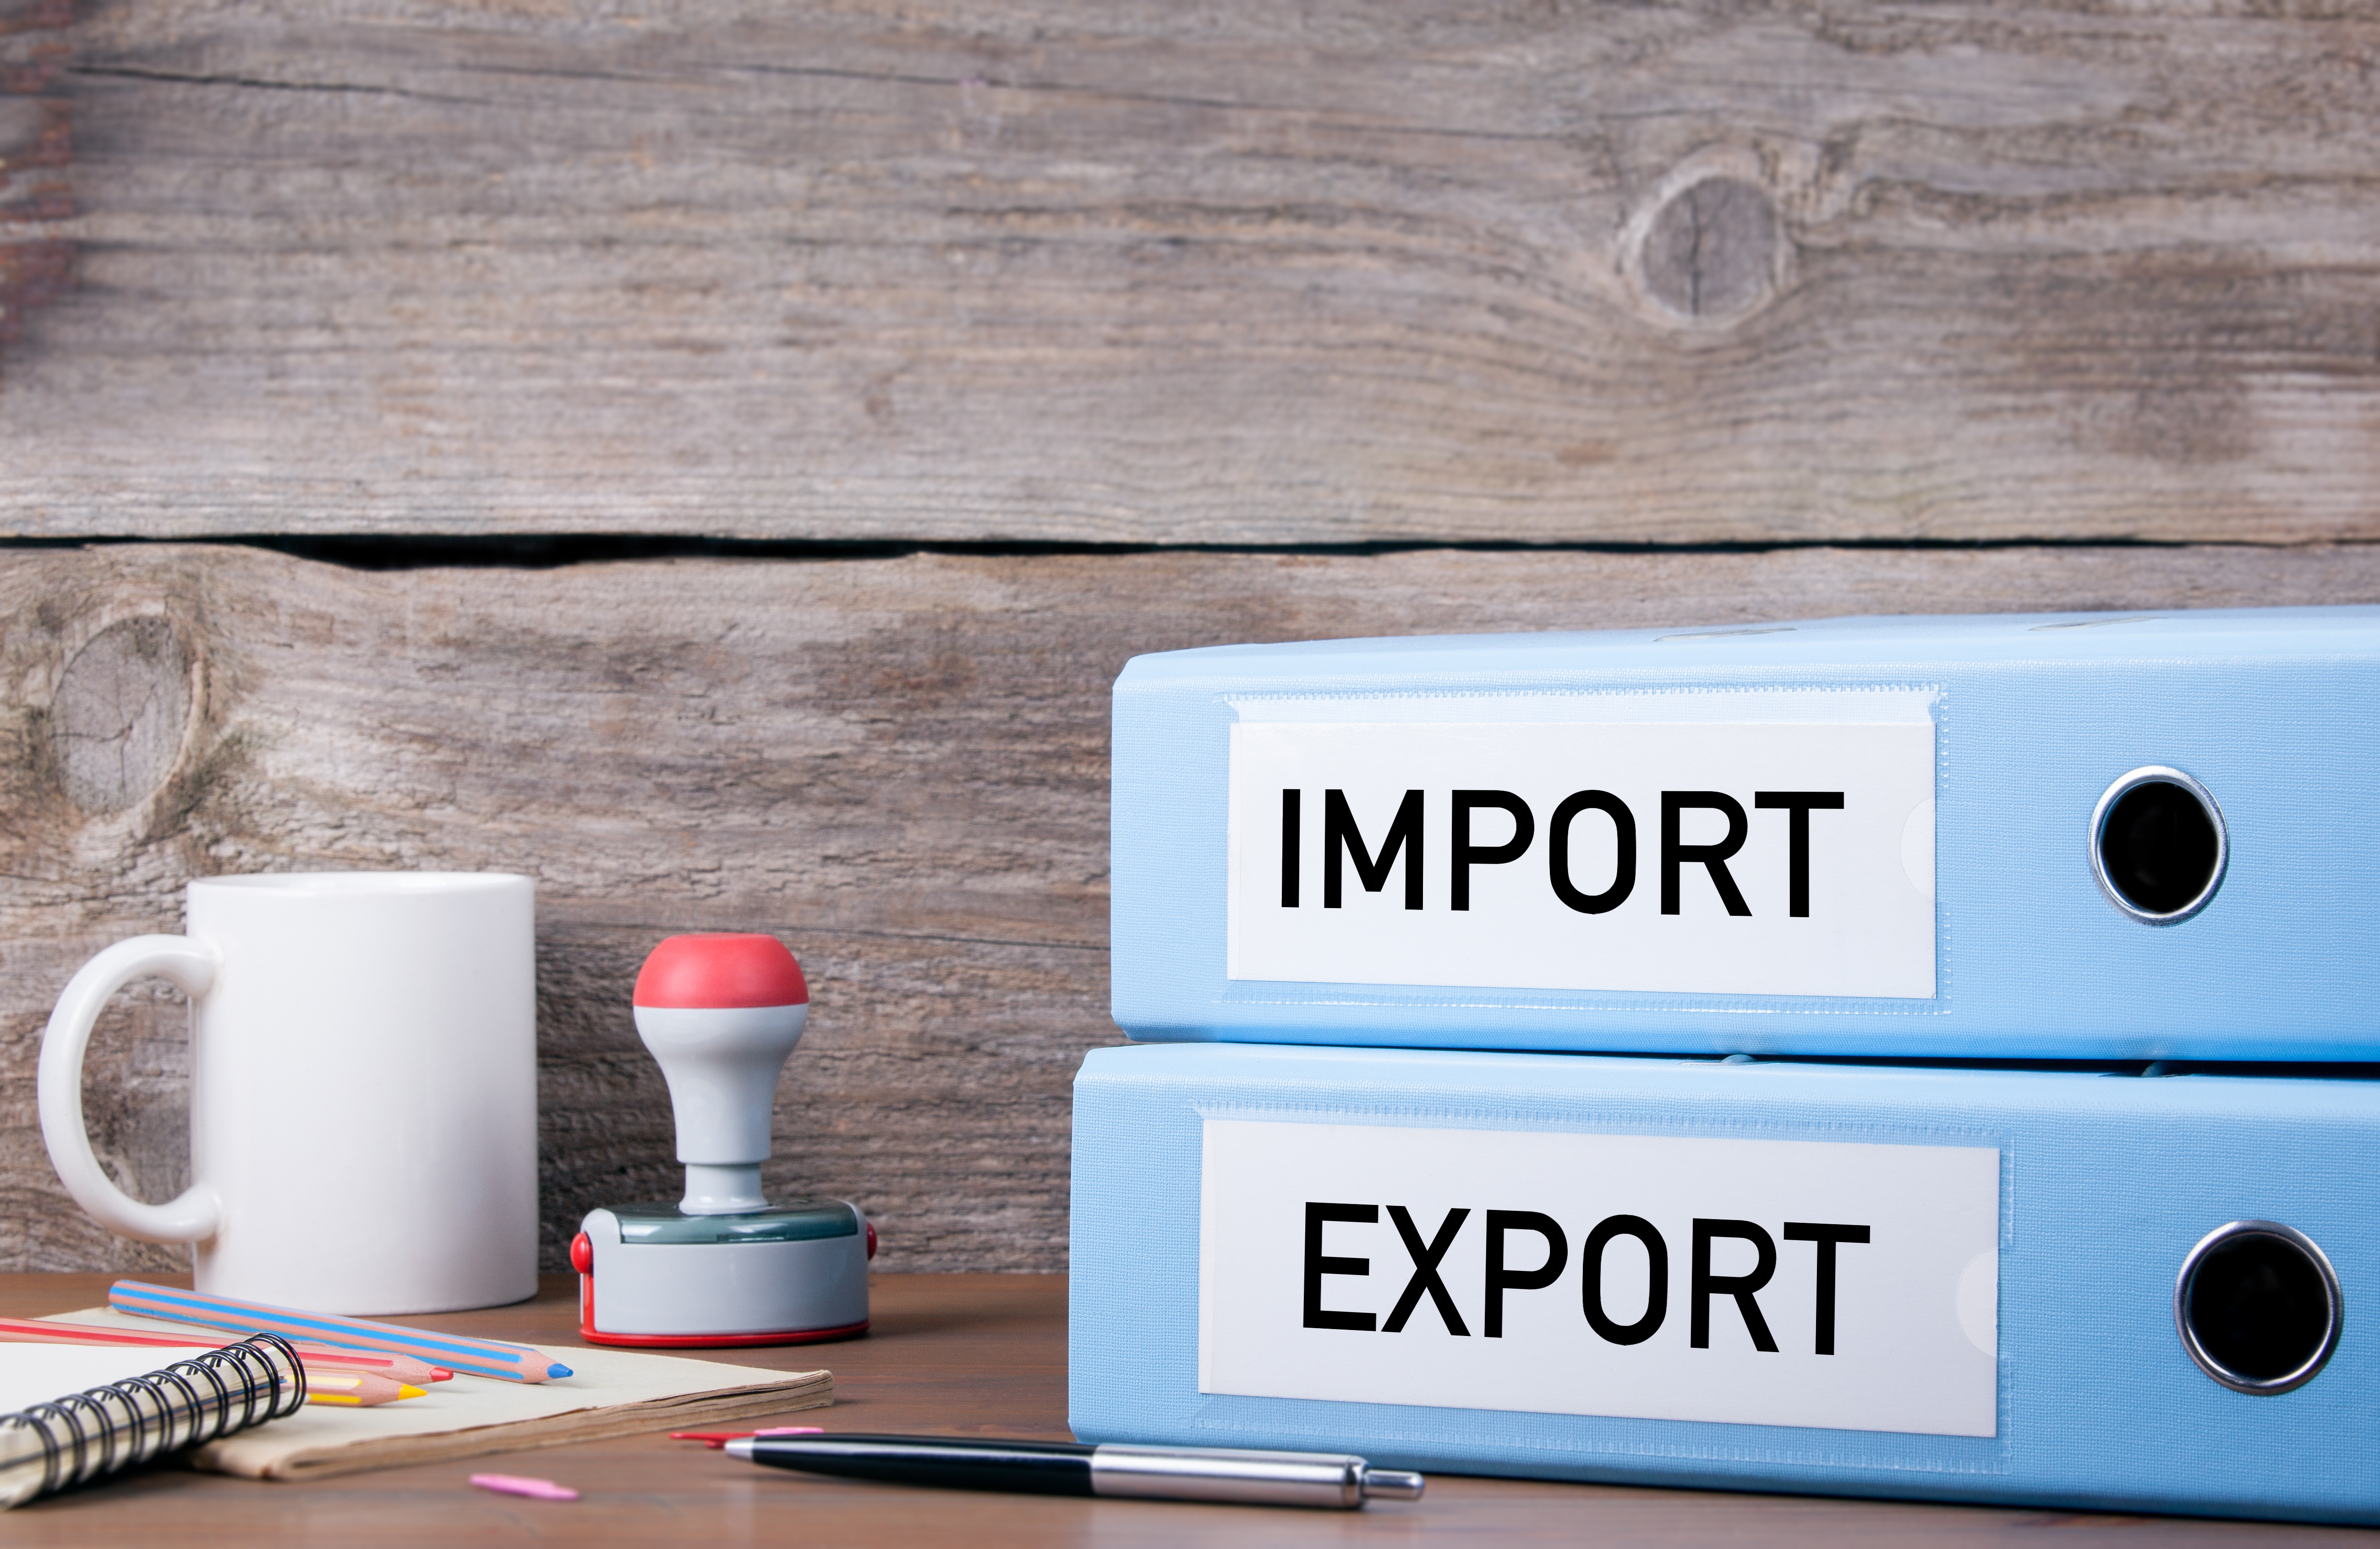 large binders on a desk labelled "import" and "export"